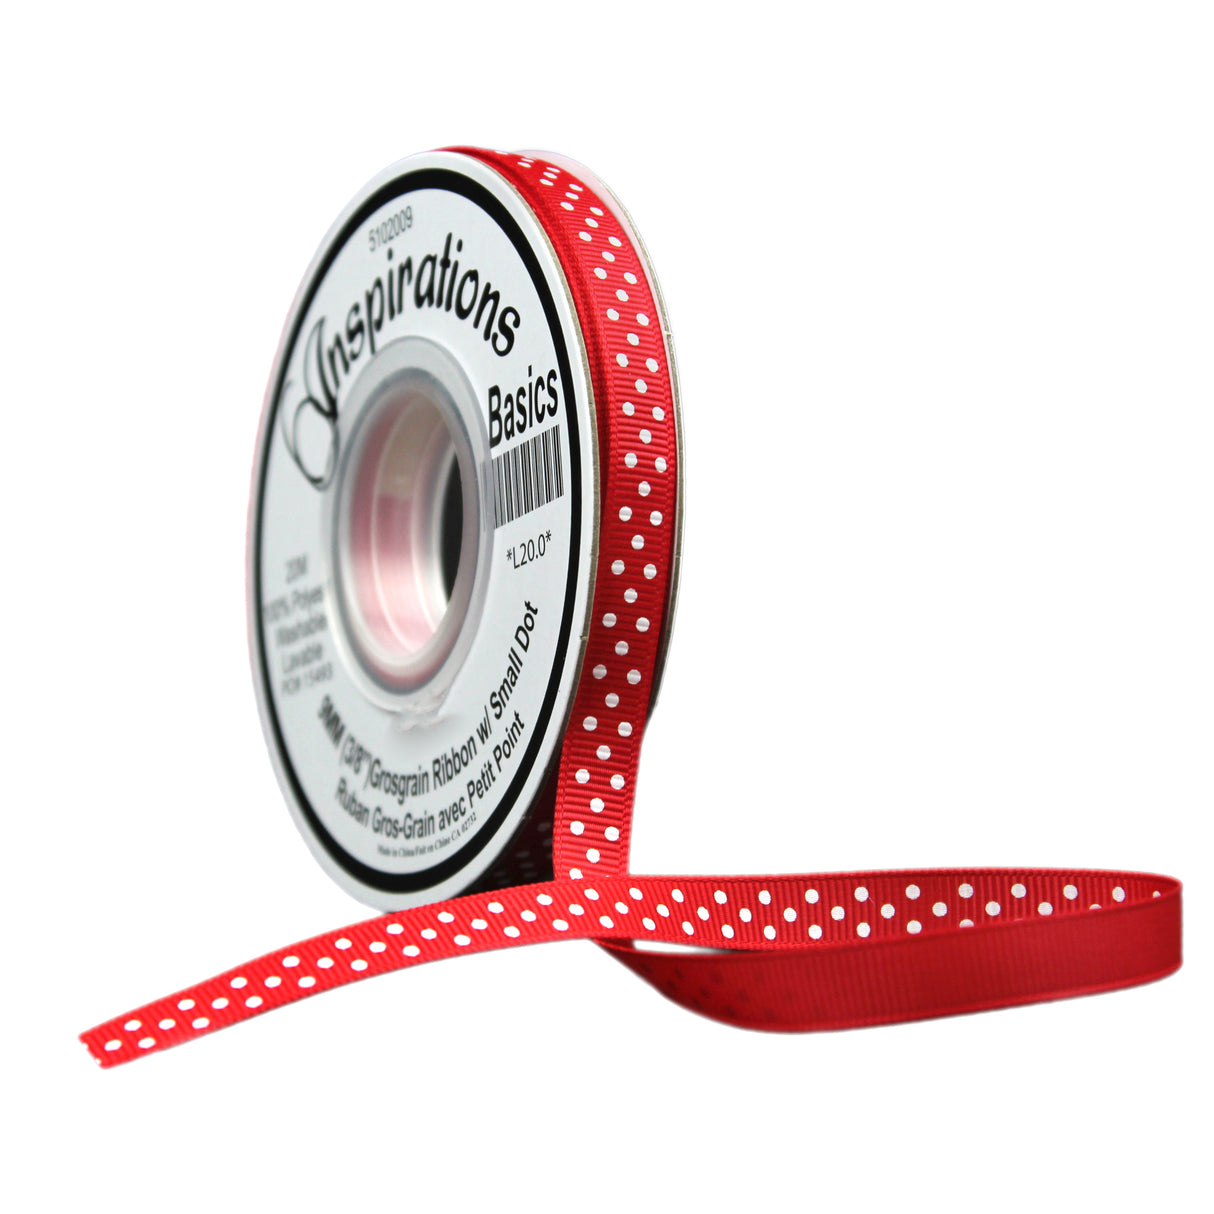 9MM GROSGRAIN RIBBON WITH SMALL DOT